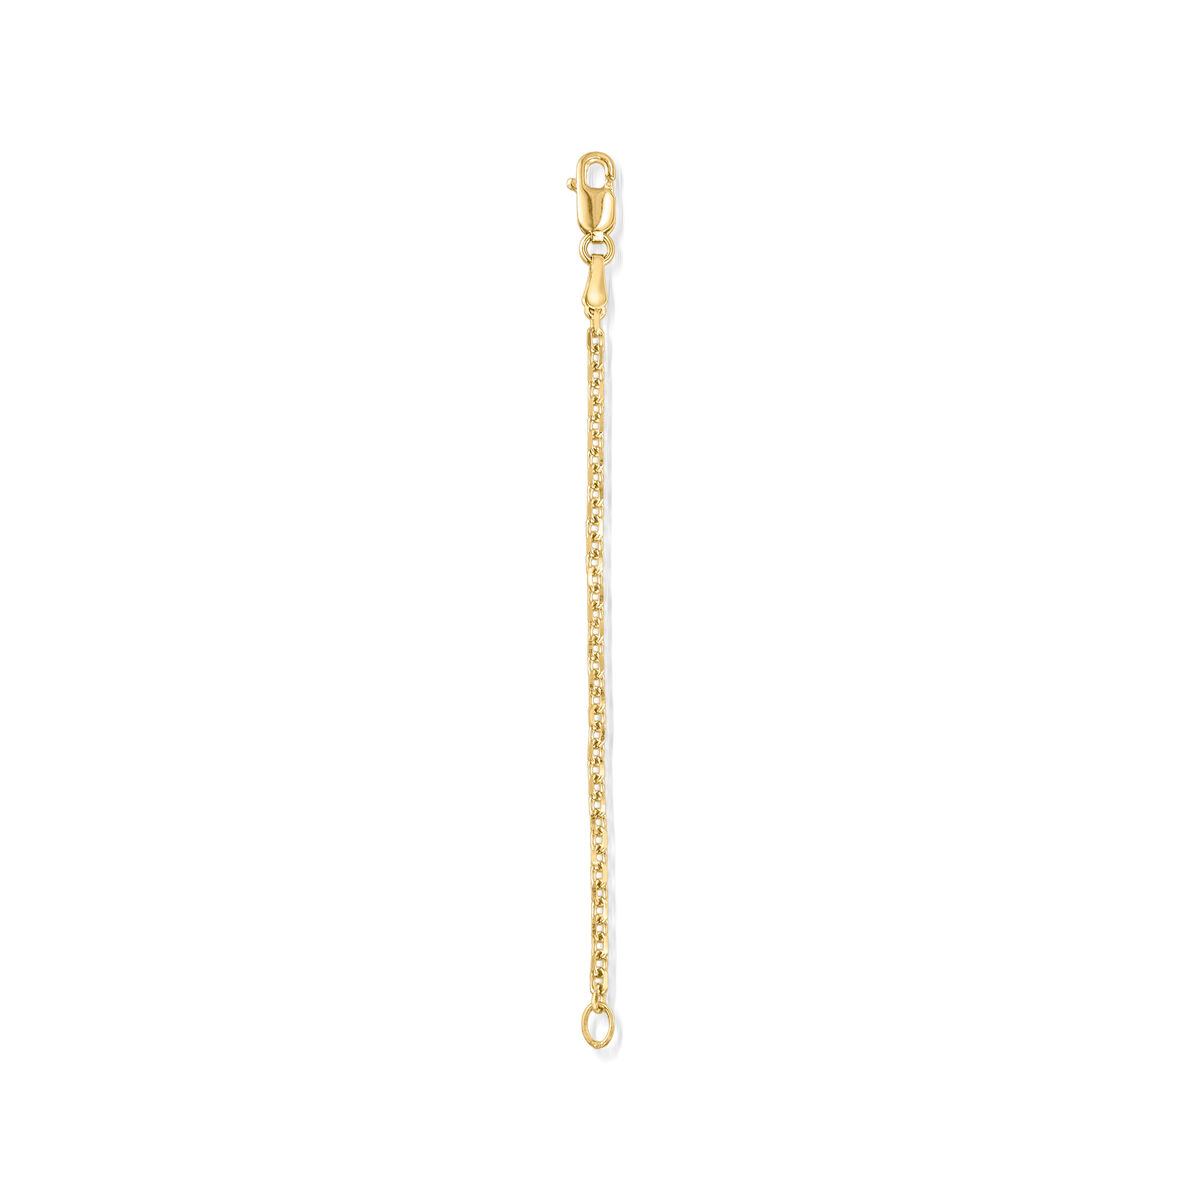 Bracelet Chain Extender, Jewelry Extension Rose Gold – AMYO Jewelry